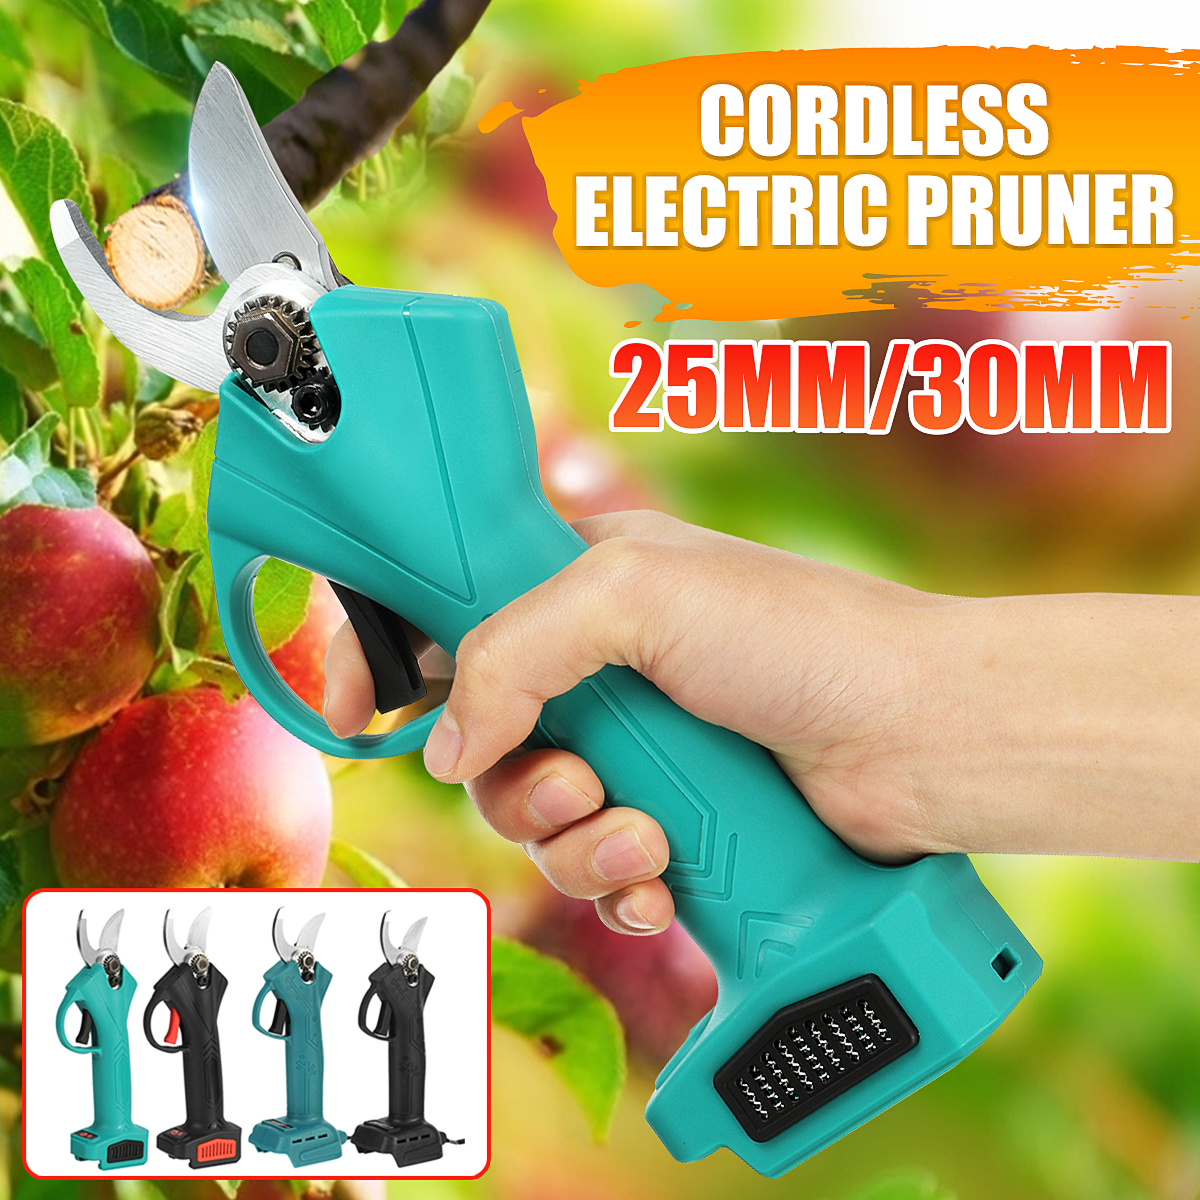 2530mm-Cordless-Electric-Branch-Scissors-Shear-Pruning-Cutter-Tool-Trimmer-For-WorxMakita-18V-21V-Ba-1816478-2